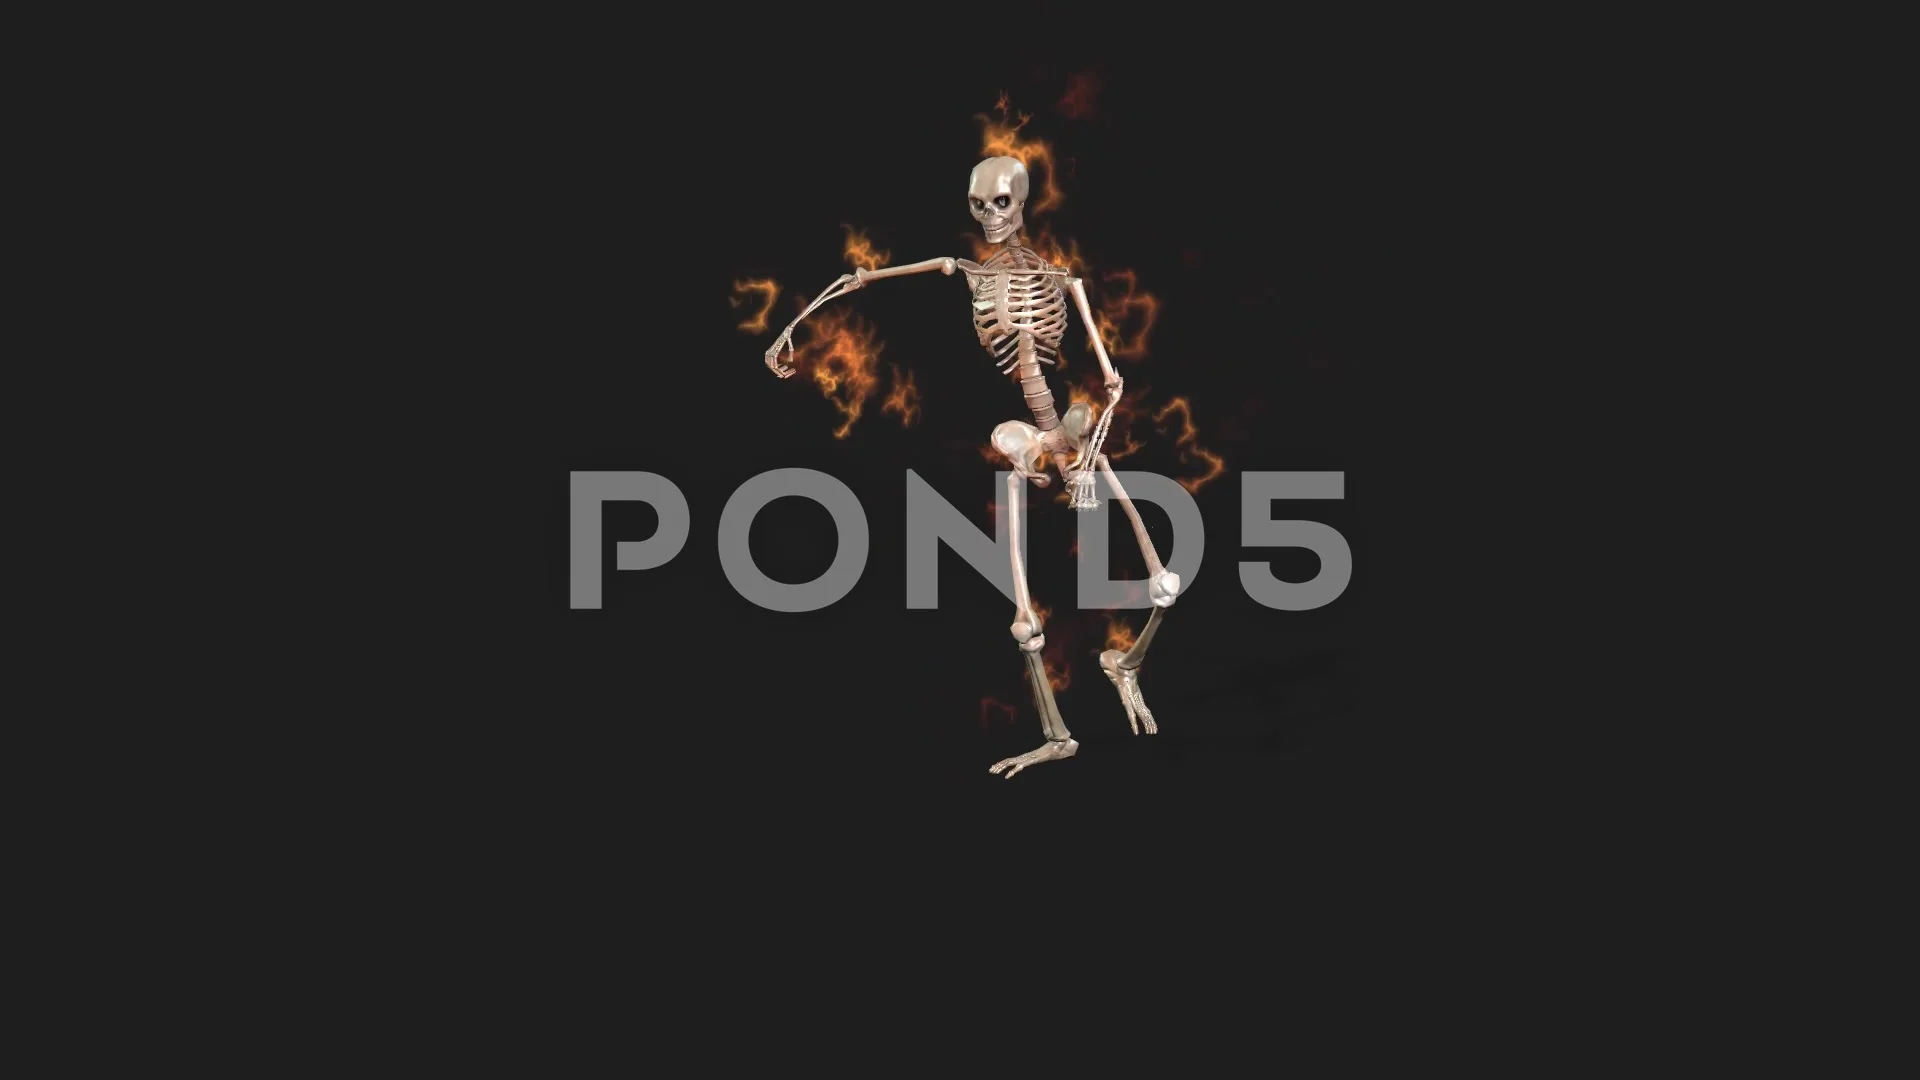 Dancing Skeleton Stock Photos and Images  123RF